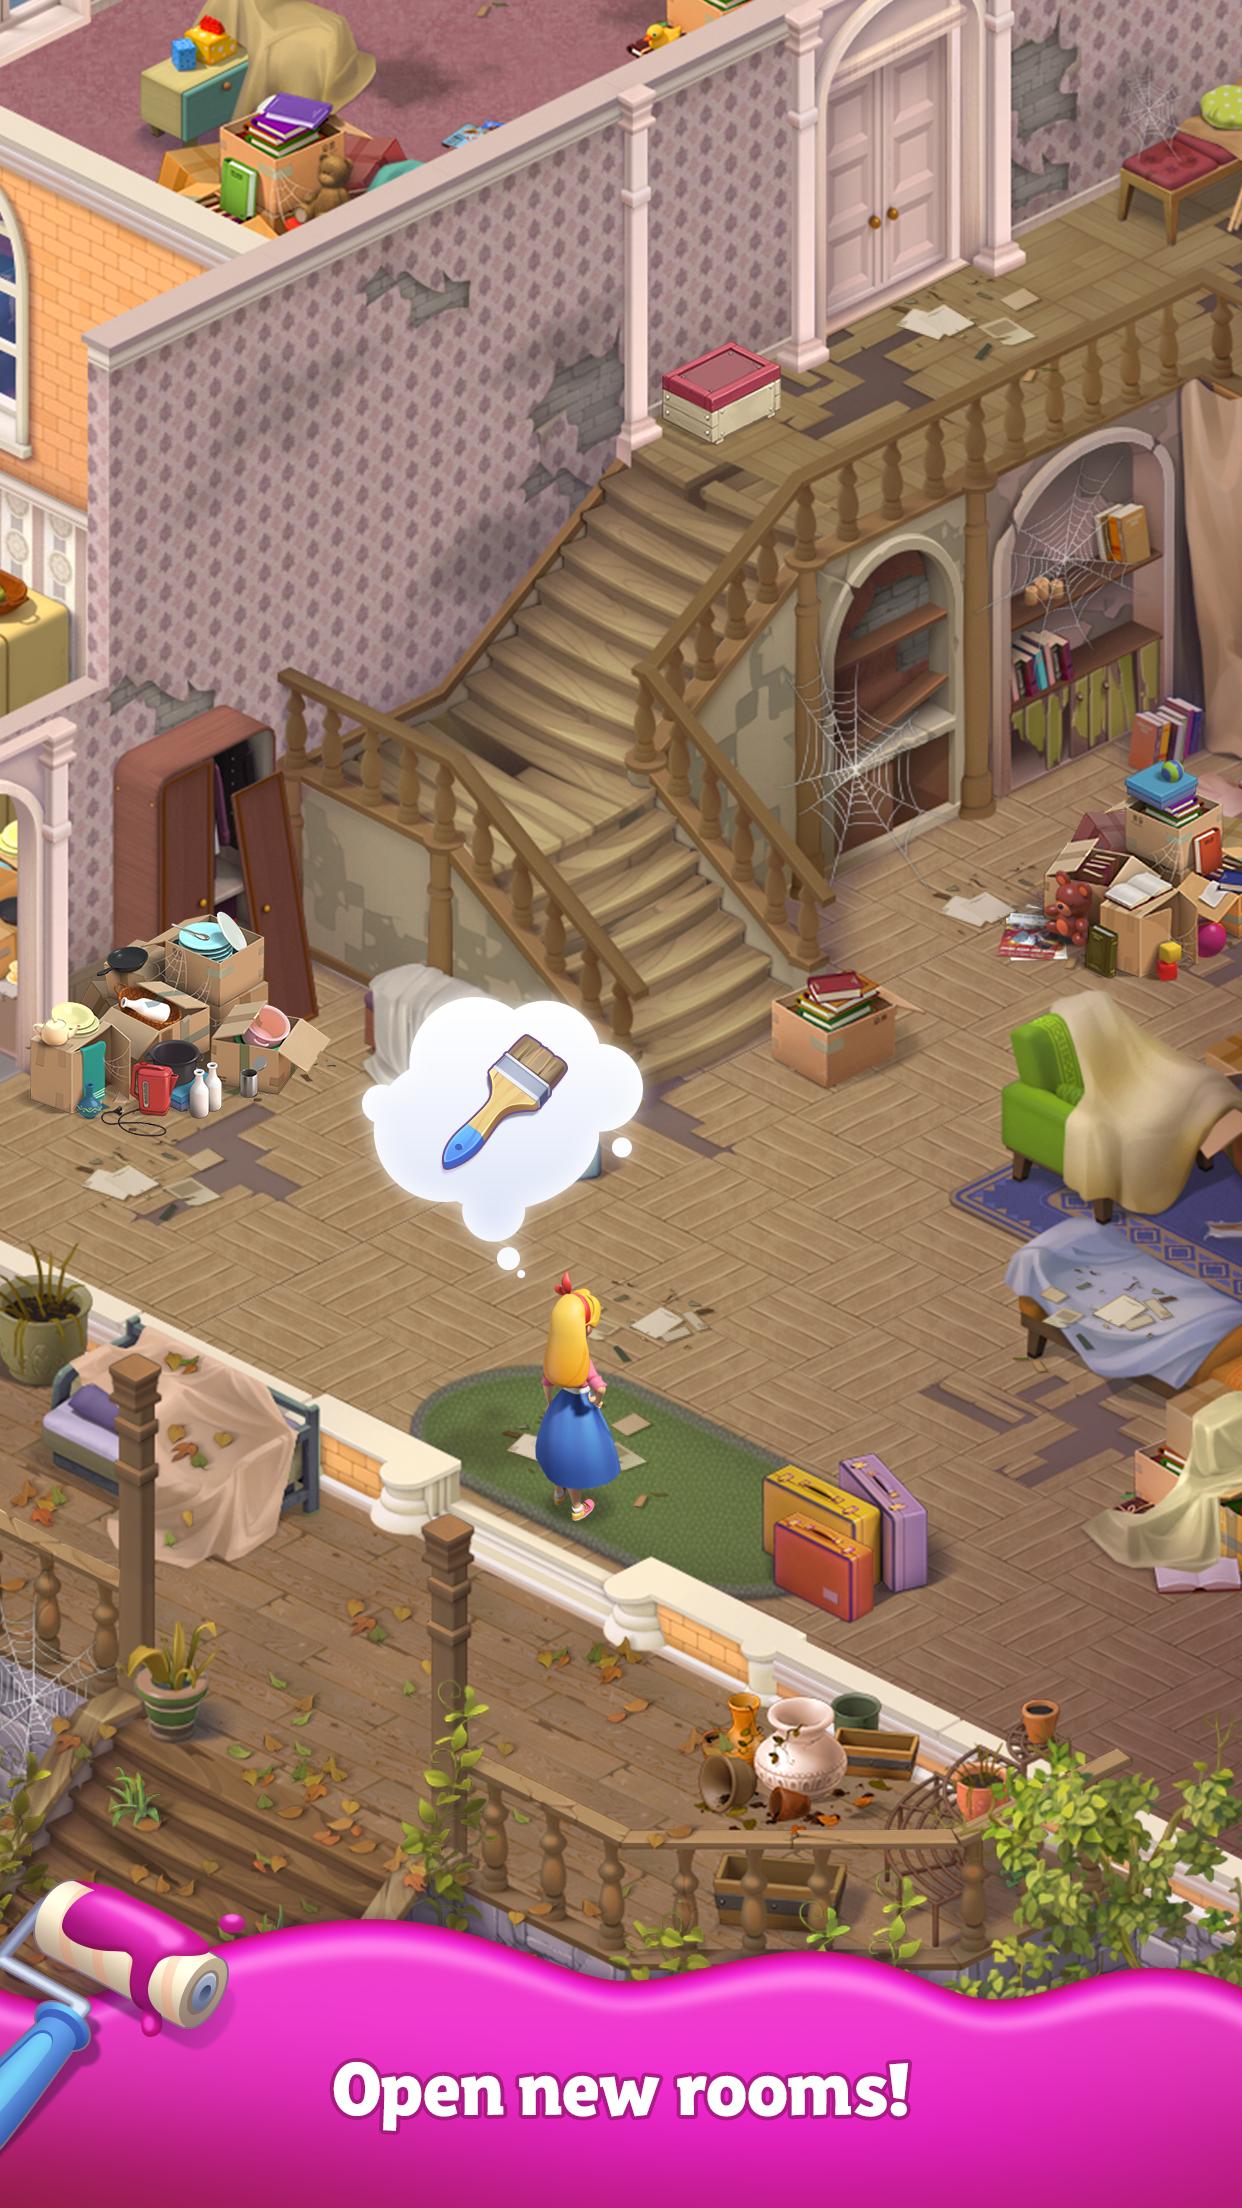 Merge Matters Home renovation game with a twist 8.8.03 Screenshot 7